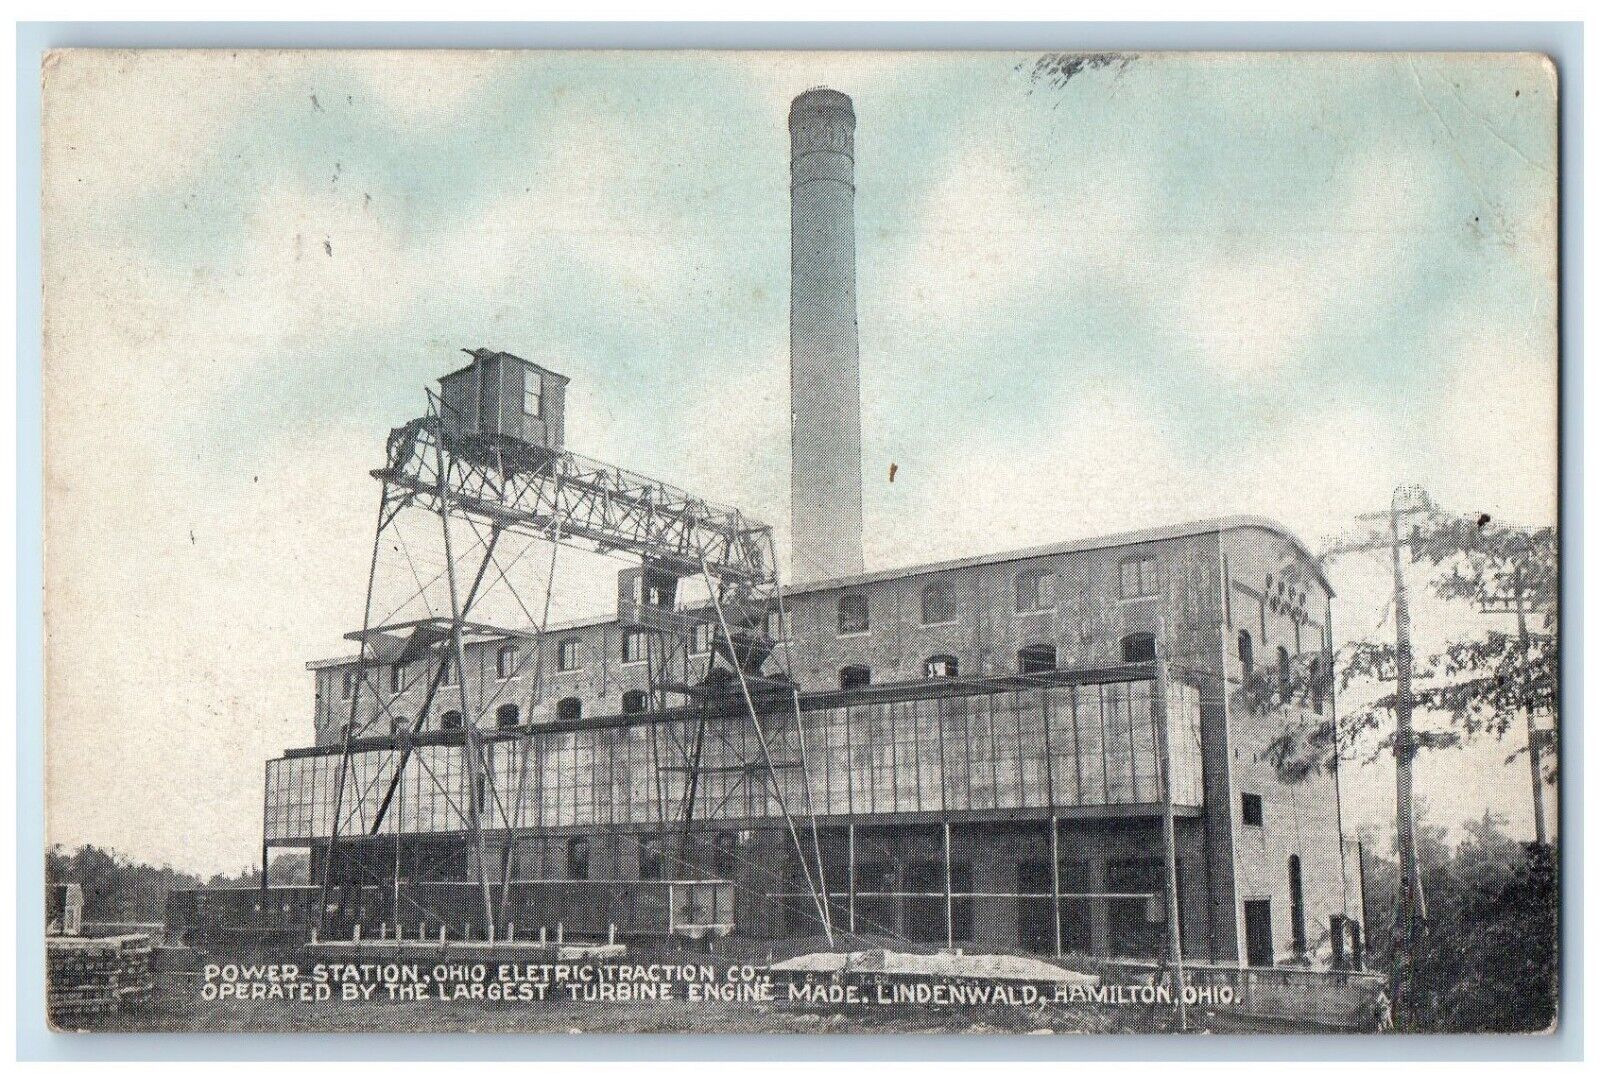 1907 Exterior View Eletrictraction Company Power Station Building Ohio Postcard